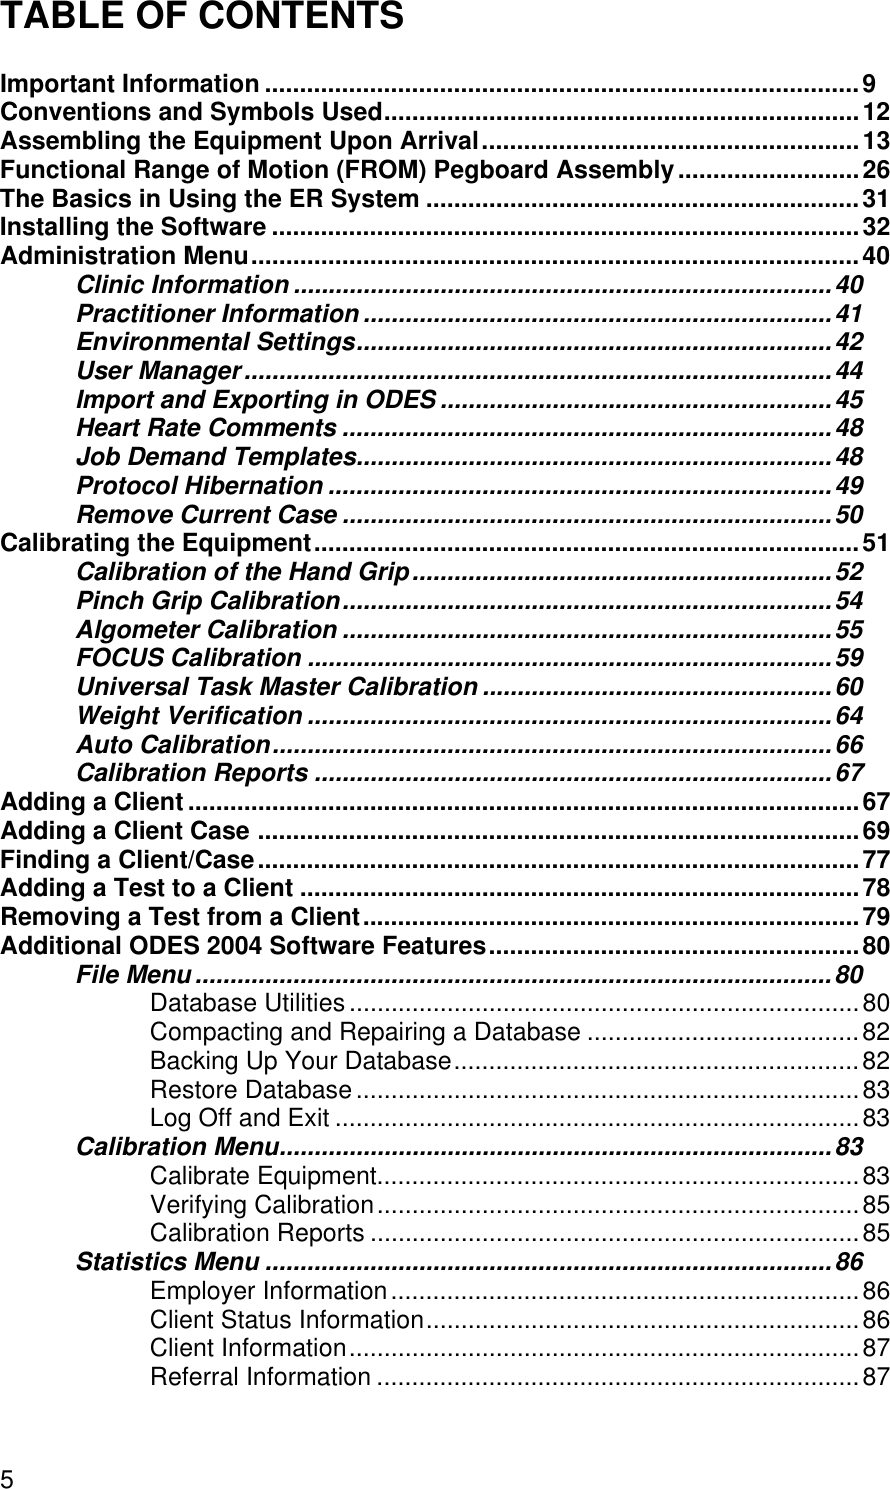 TABLE OF CONTENTS5Important Information .....................................................................................9Conventions and Symbols Used....................................................................12Assembling the Equipment Upon Arrival......................................................13Functional Range of Motion (FROM) Pegboard Assembly..........................26The Basics in Using the ER System ..............................................................31Installing the Software ....................................................................................32Administration Menu.......................................................................................40Clinic Information .............................................................................40Practitioner Information ...................................................................41Environmental Settings....................................................................42User Manager....................................................................................44Import and Exporting in ODES ........................................................45Heart Rate Comments ......................................................................48Job Demand Templates....................................................................48Protocol Hibernation ........................................................................49Remove Current Case ......................................................................50Calibrating the Equipment..............................................................................51Calibration of the Hand Grip............................................................52Pinch Grip Calibration......................................................................54Algometer Calibration ......................................................................55FOCUS Calibration ...........................................................................59Universal Task Master Calibration ..................................................60Weight Verification ...........................................................................64Auto Calibration................................................................................66Calibration Reports ..........................................................................67Adding a Client ................................................................................................67Adding a Client Case ......................................................................................69Finding a Client/Case......................................................................................77Adding a Test to a Client ................................................................................78Removing a Test from a Client.......................................................................79Additional ODES 2004 Software Features.....................................................80File Menu ...........................................................................................80Database Utilities.........................................................................80Compacting and Repairing a Database .......................................82Backing Up Your Database..........................................................82Restore Database........................................................................83Log Off and Exit ...........................................................................83Calibration Menu...............................................................................83Calibrate Equipment.....................................................................83Verifying Calibration.....................................................................85Calibration Reports ......................................................................85Statistics Menu .................................................................................86Employer Information...................................................................86Client Status Information..............................................................86Client Information.........................................................................87Referral Information .....................................................................87